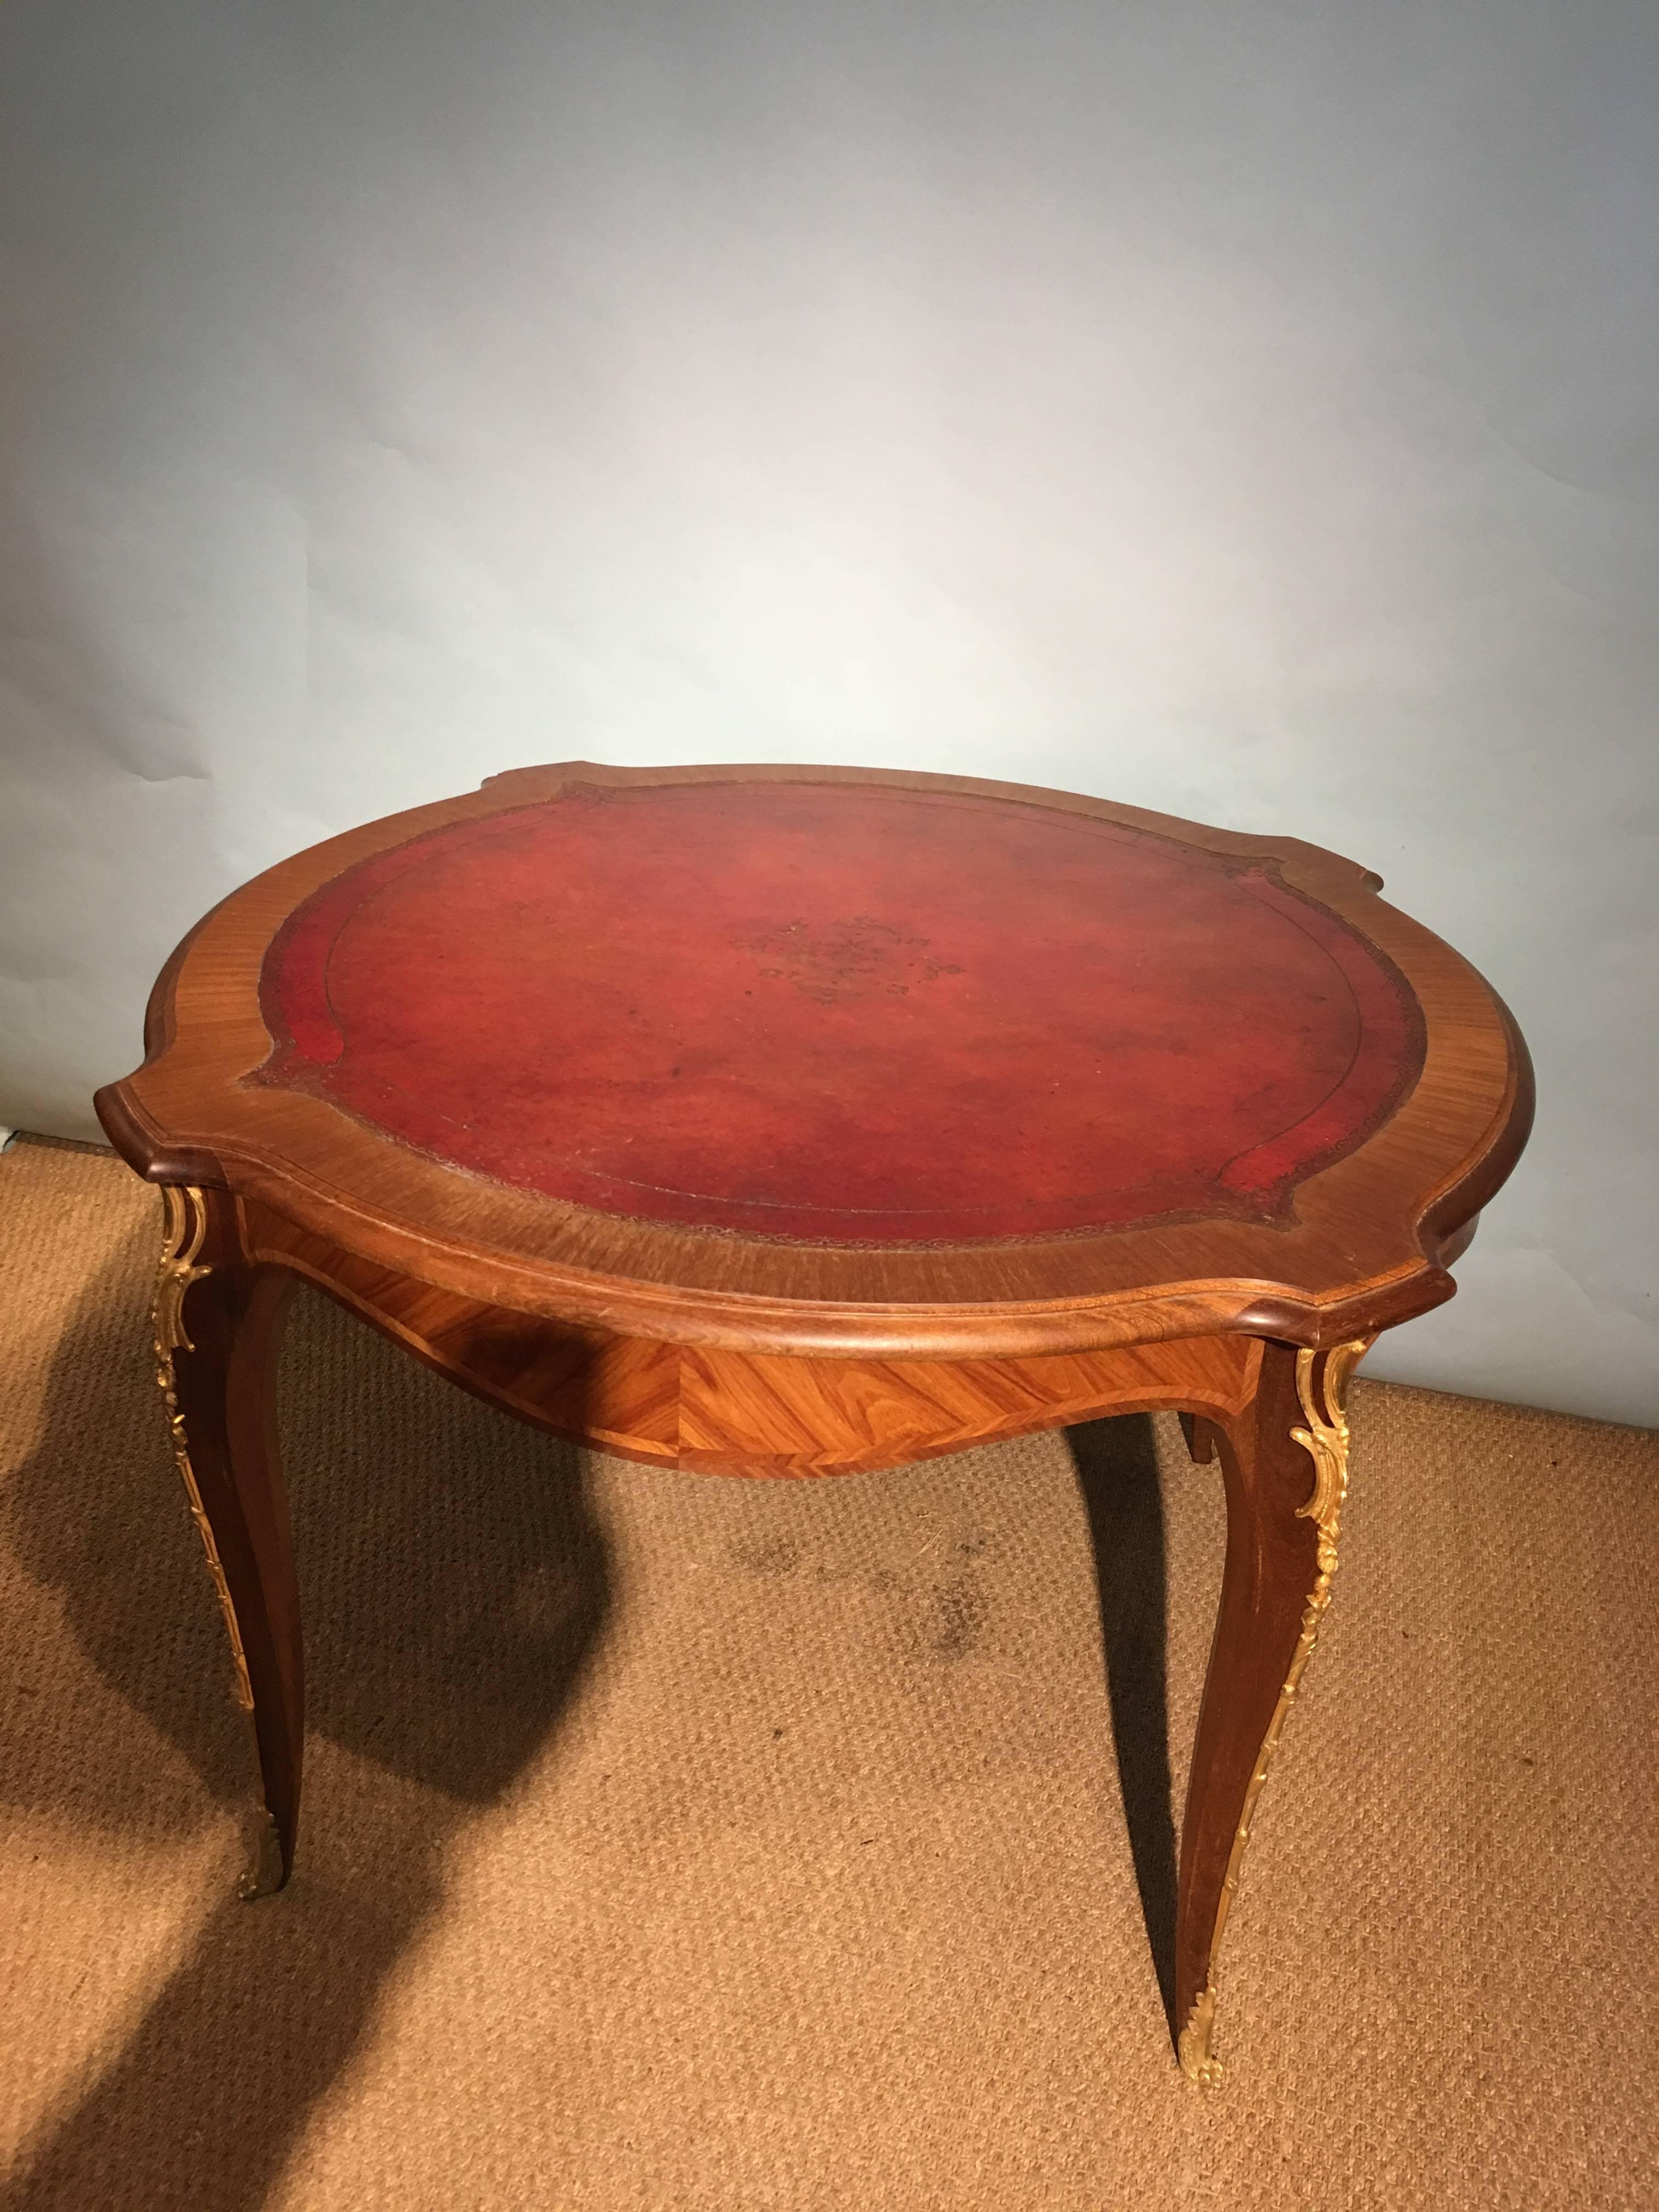 Very stylish centre table / bridge table 

French dating to circa 1930s with original tooled leather insert Paris quality ormolu mounts 

Measure: Diameter 47 inches or 120 cms 
Height 29 inches or 75 cms.